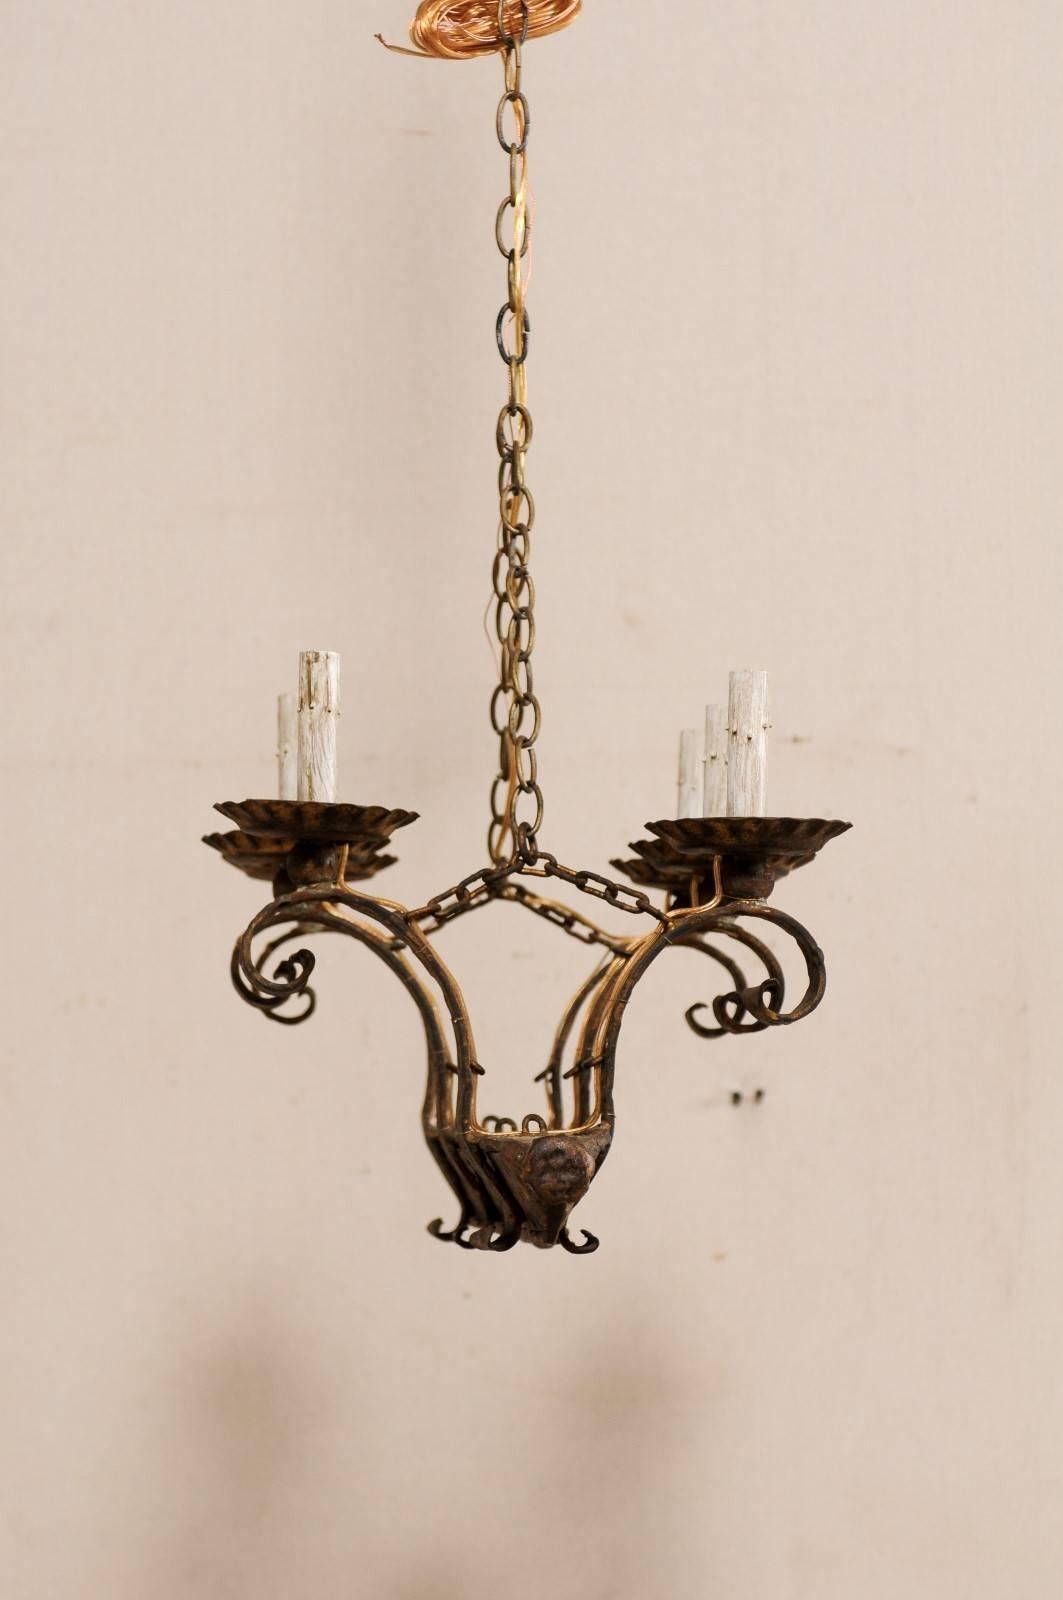 20th Century French Six-Light Forged and Hammered Iron Chandelier in Gold Colored Finish For Sale